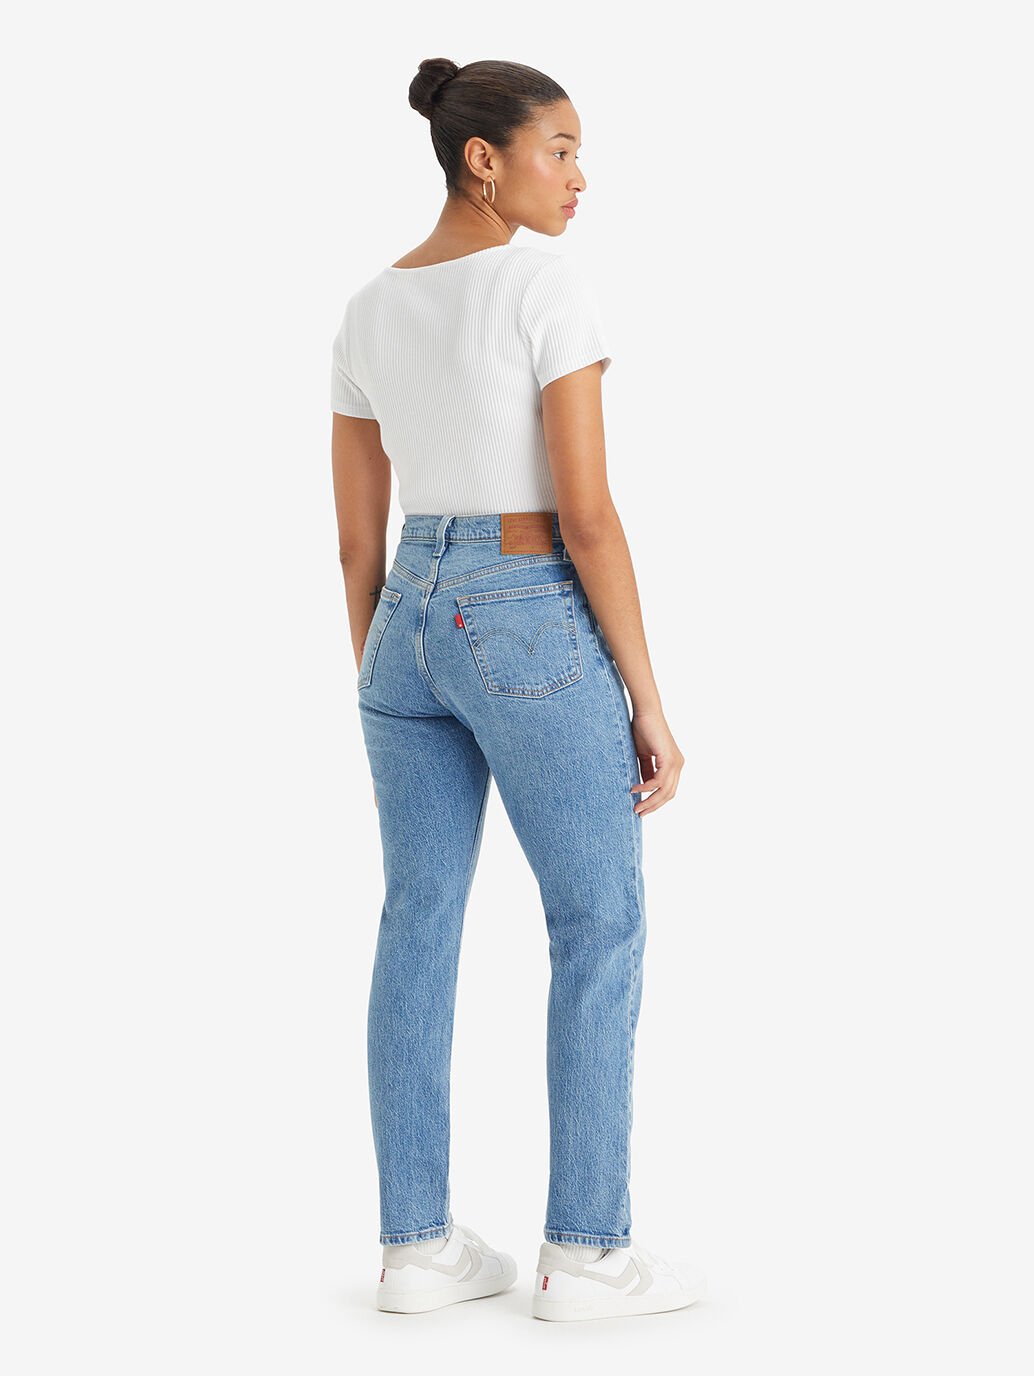 The 501 Original Fit Jeans by Levi's - Hollow Days